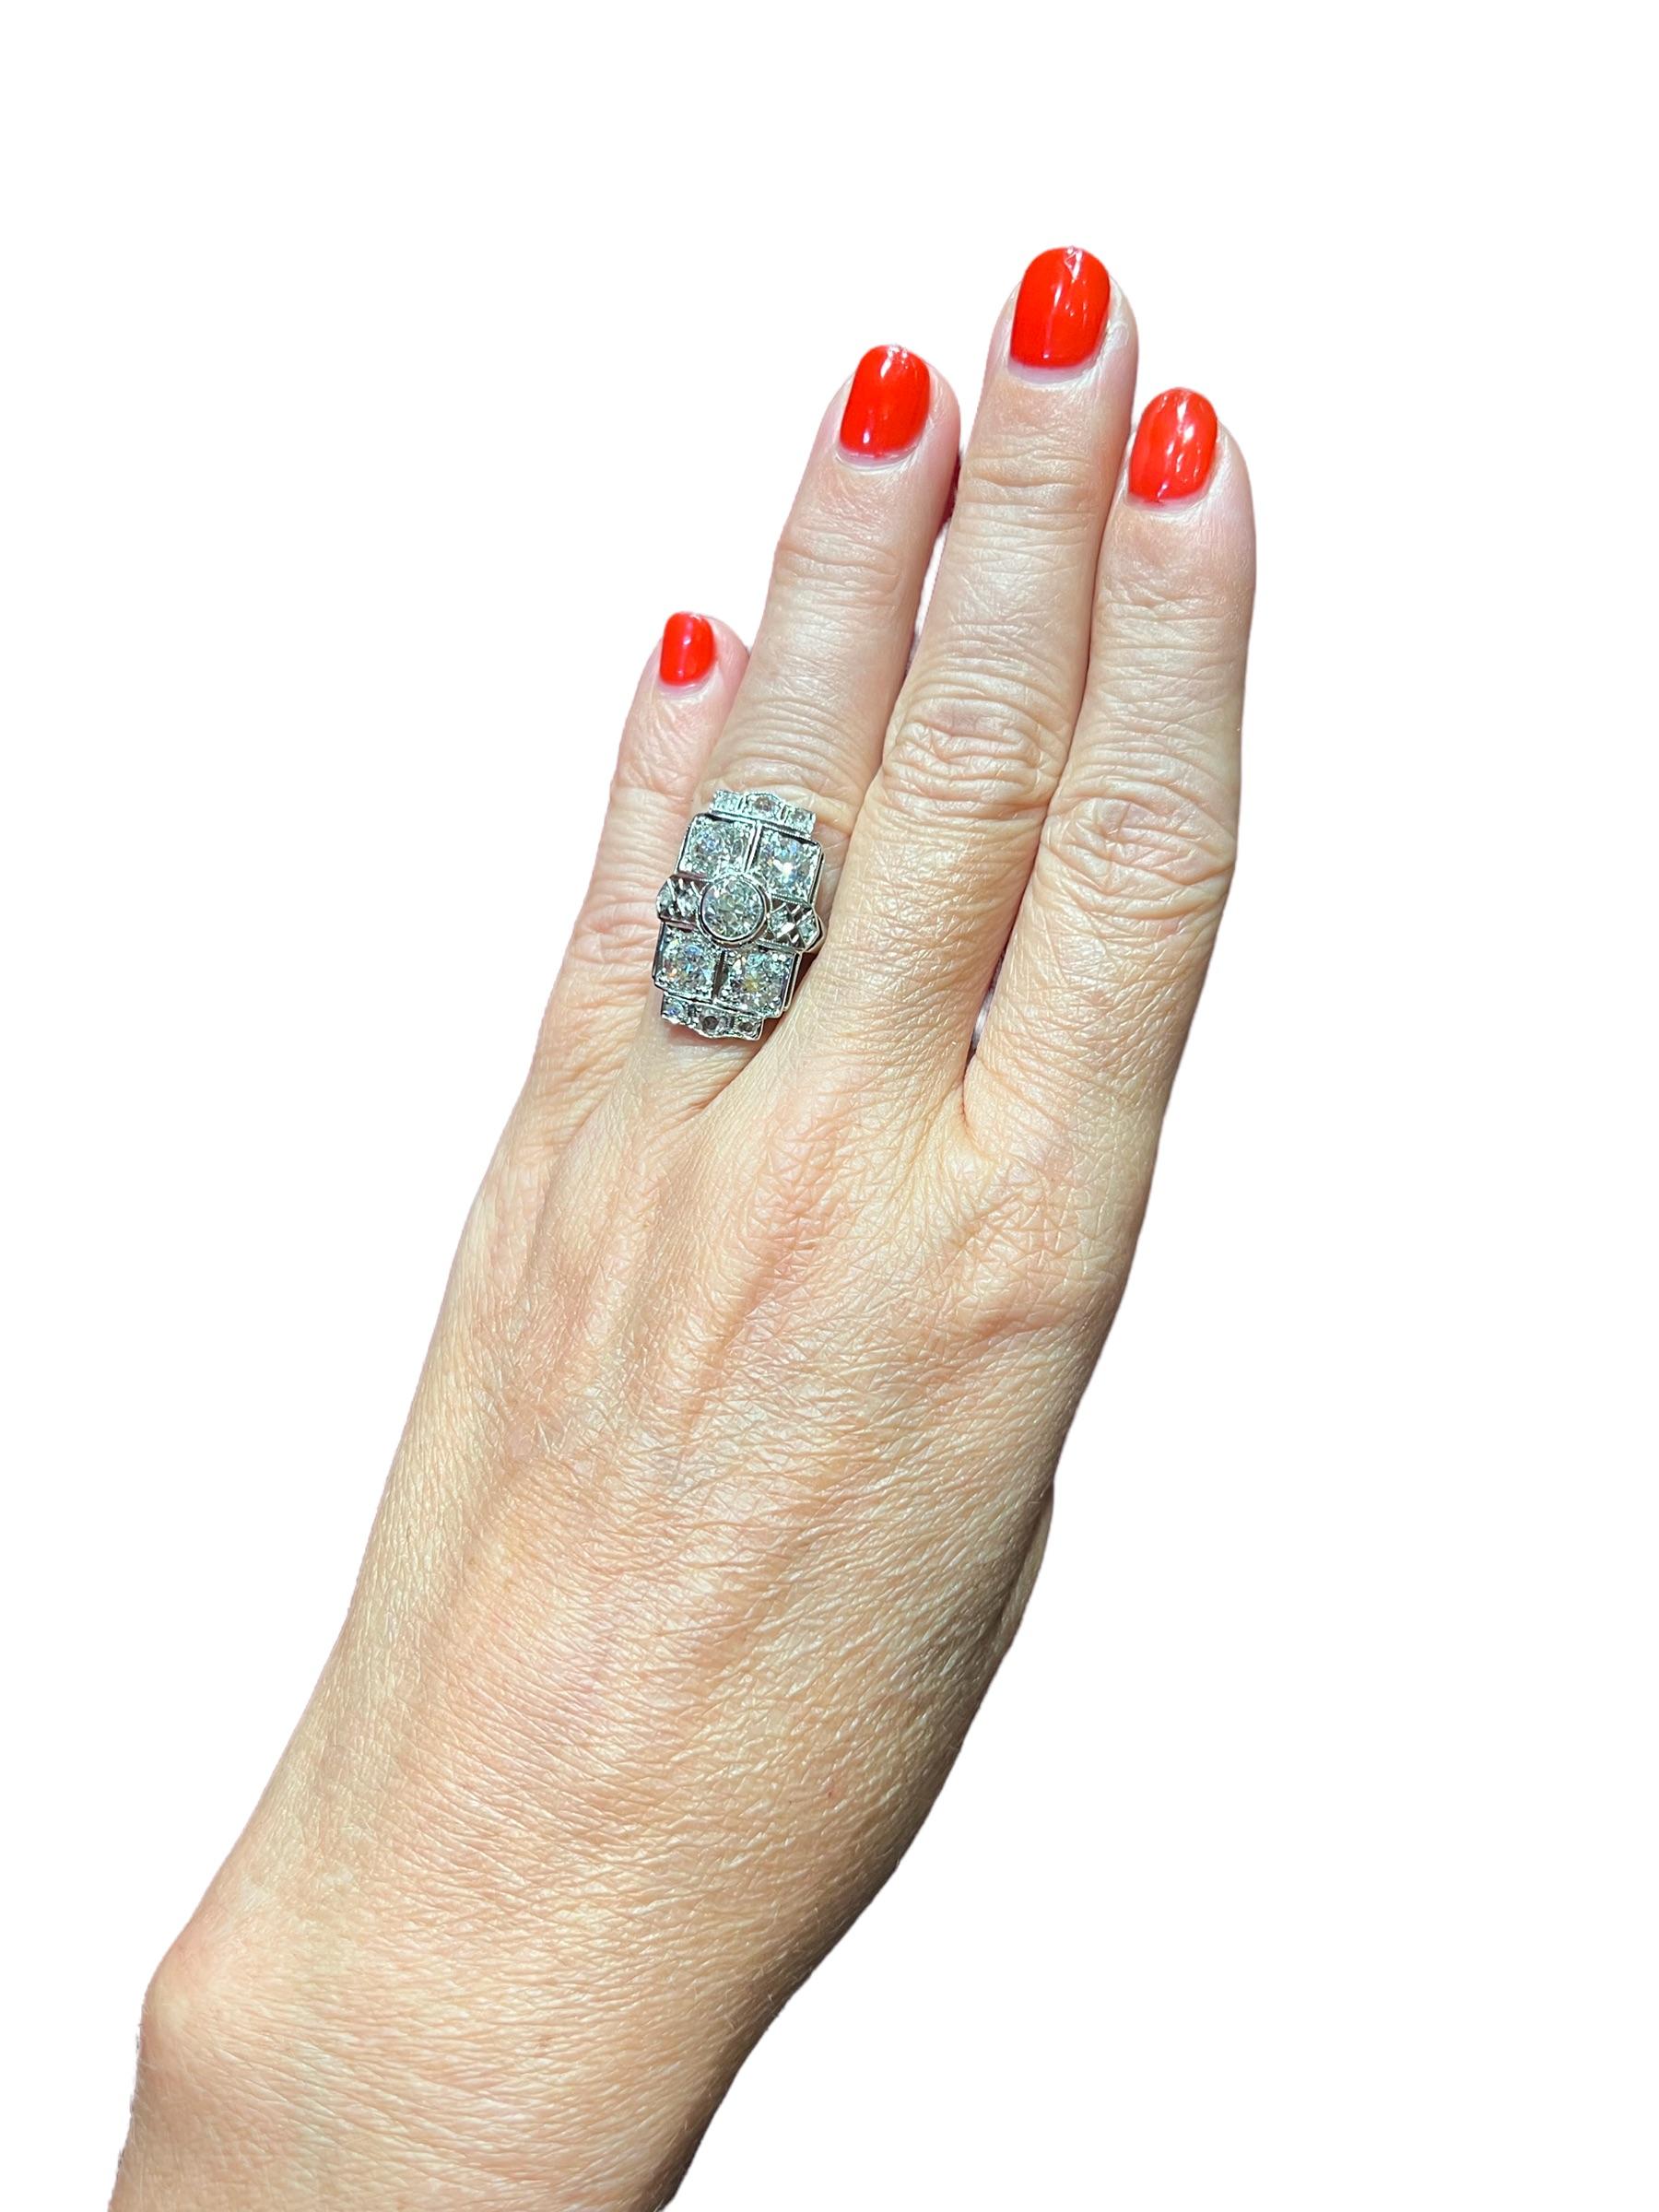  Art Deco , Platinum and 18ct Gold , Ring, Set with Old-Cut Diamonds, 1930 Period  3